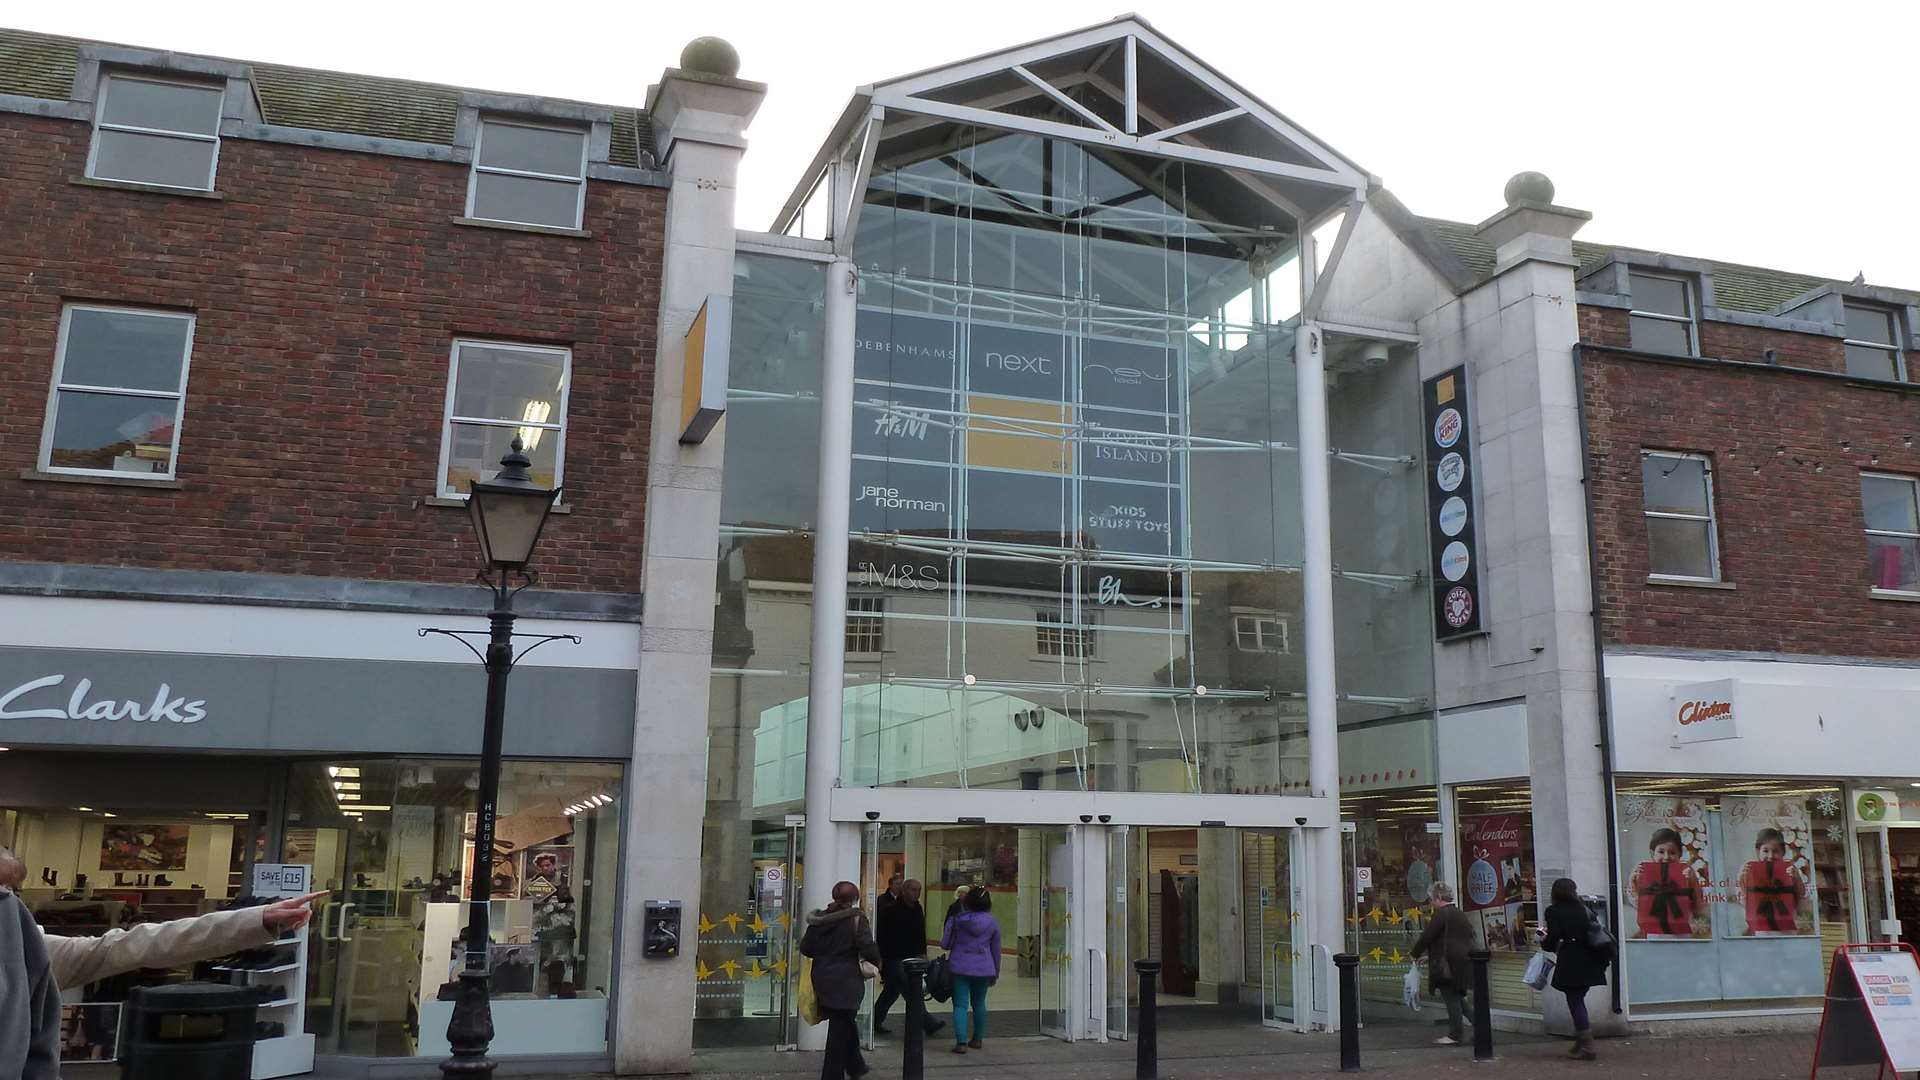 County Square shopping centre